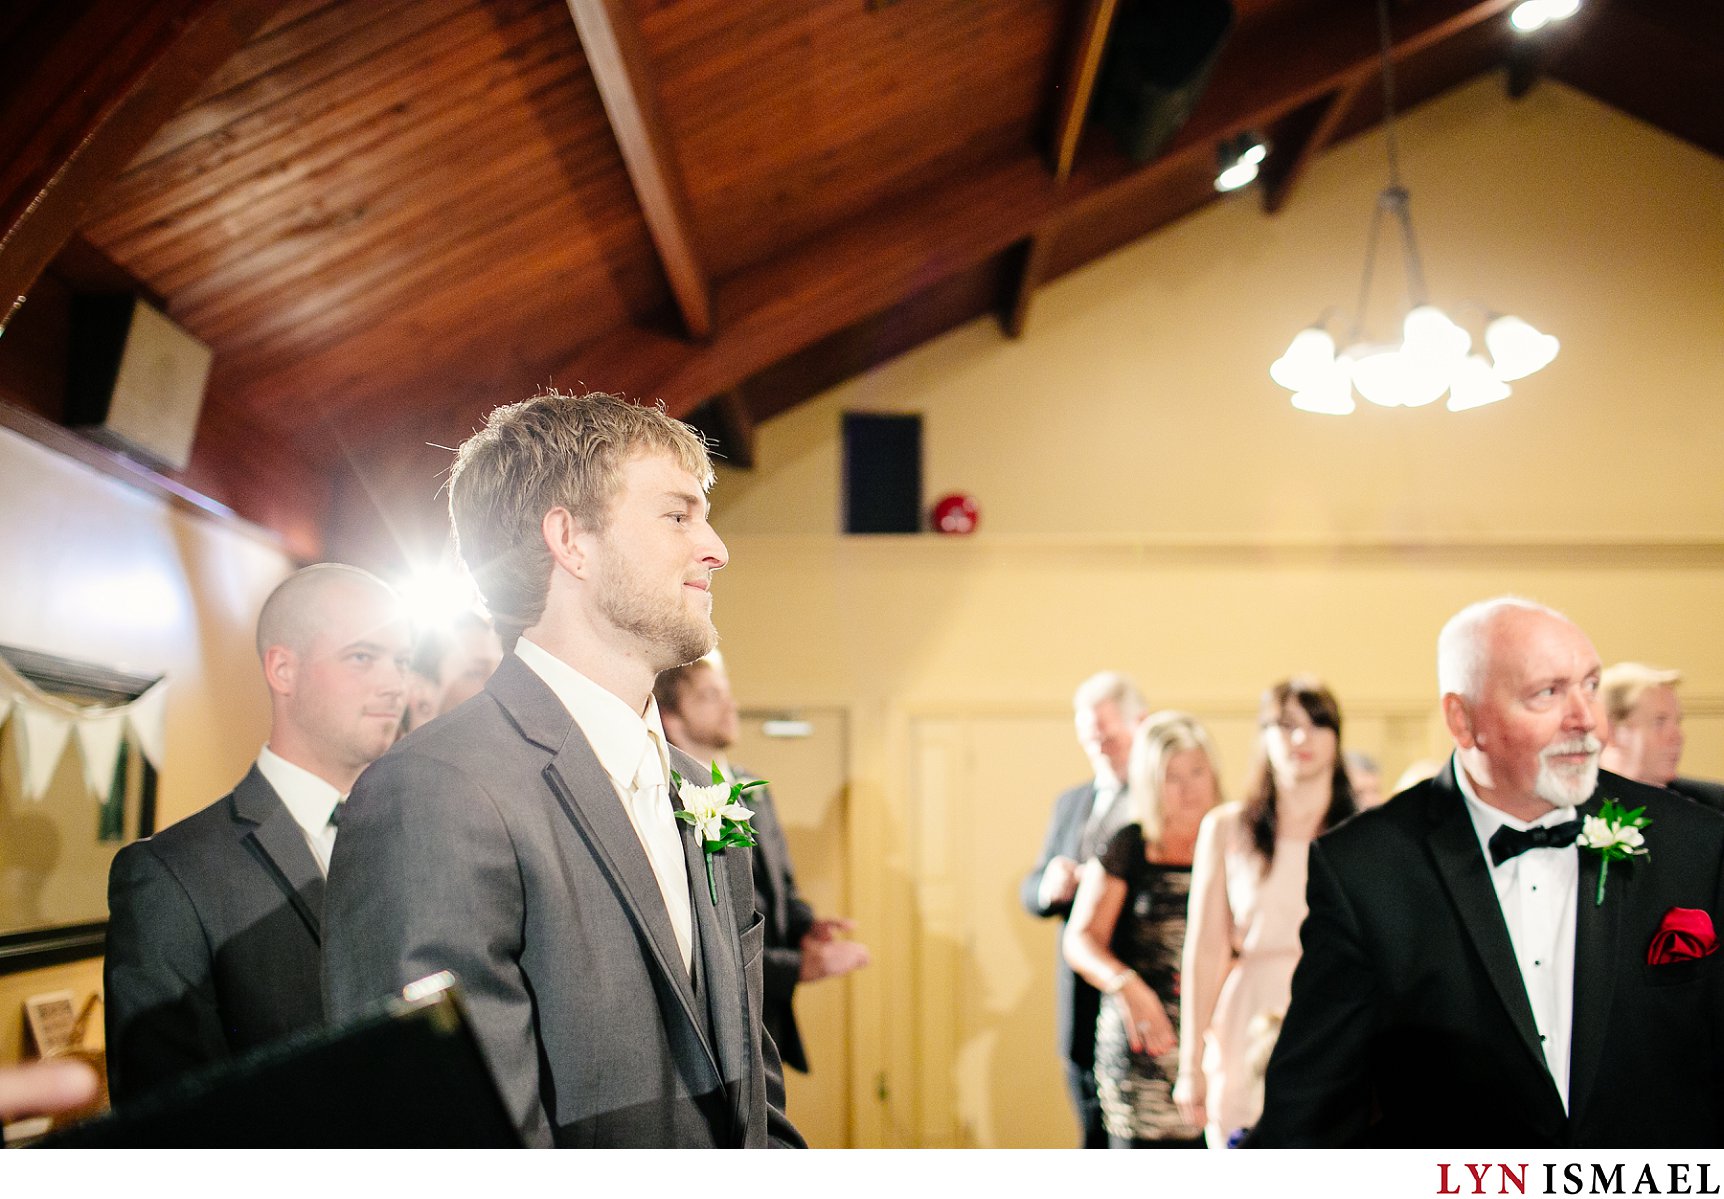 The groom watches as his bride walks down the aisle.